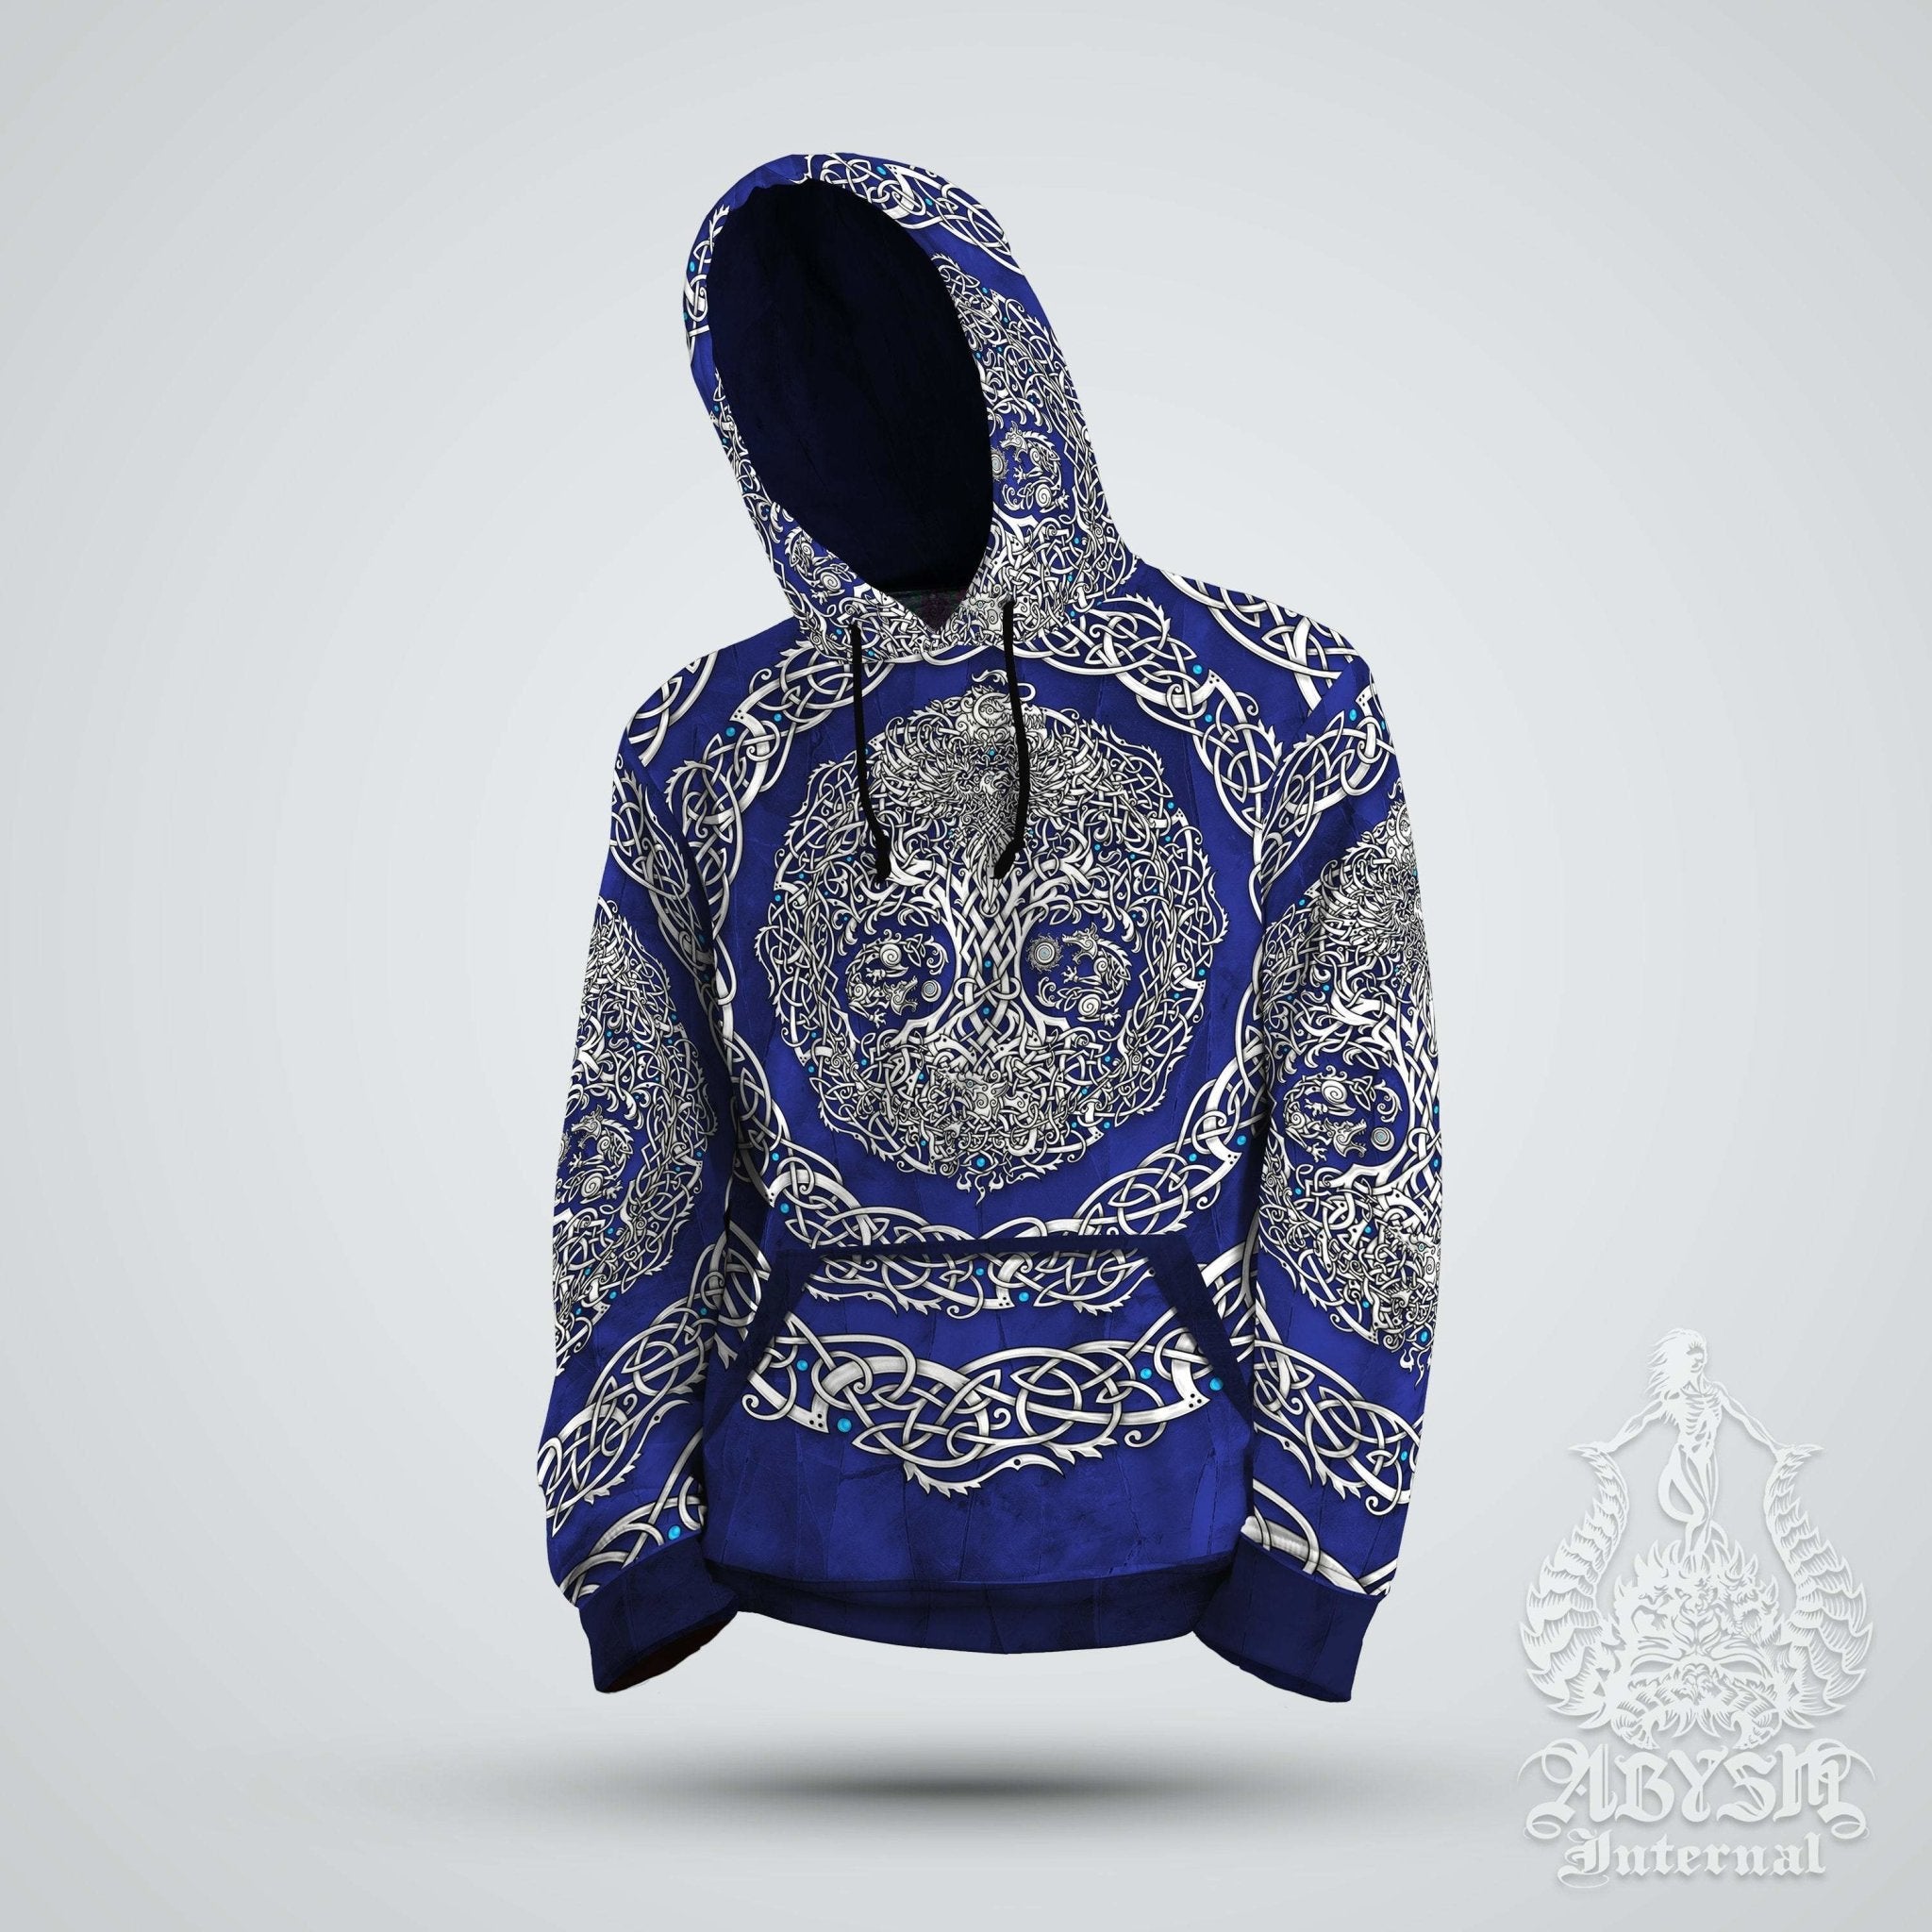 Yggdrasil Hoodie, Viking Sweater, Norse Street Outfit, Tree of Life Streetwear, Alternative Clothing, Unisex - White Blue - Abysm Internal